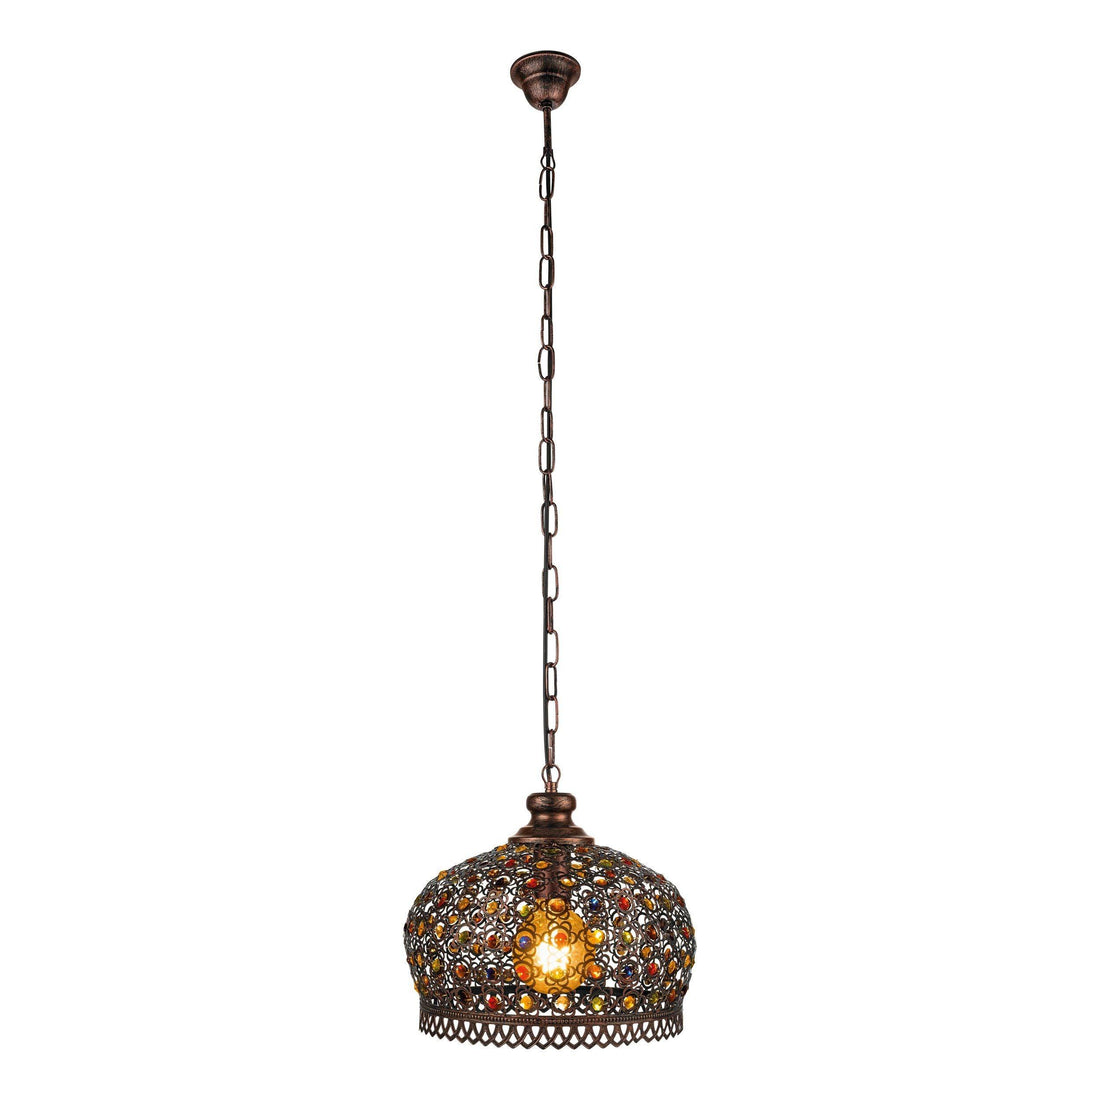 JADIDA Pendant Light by The Light Library